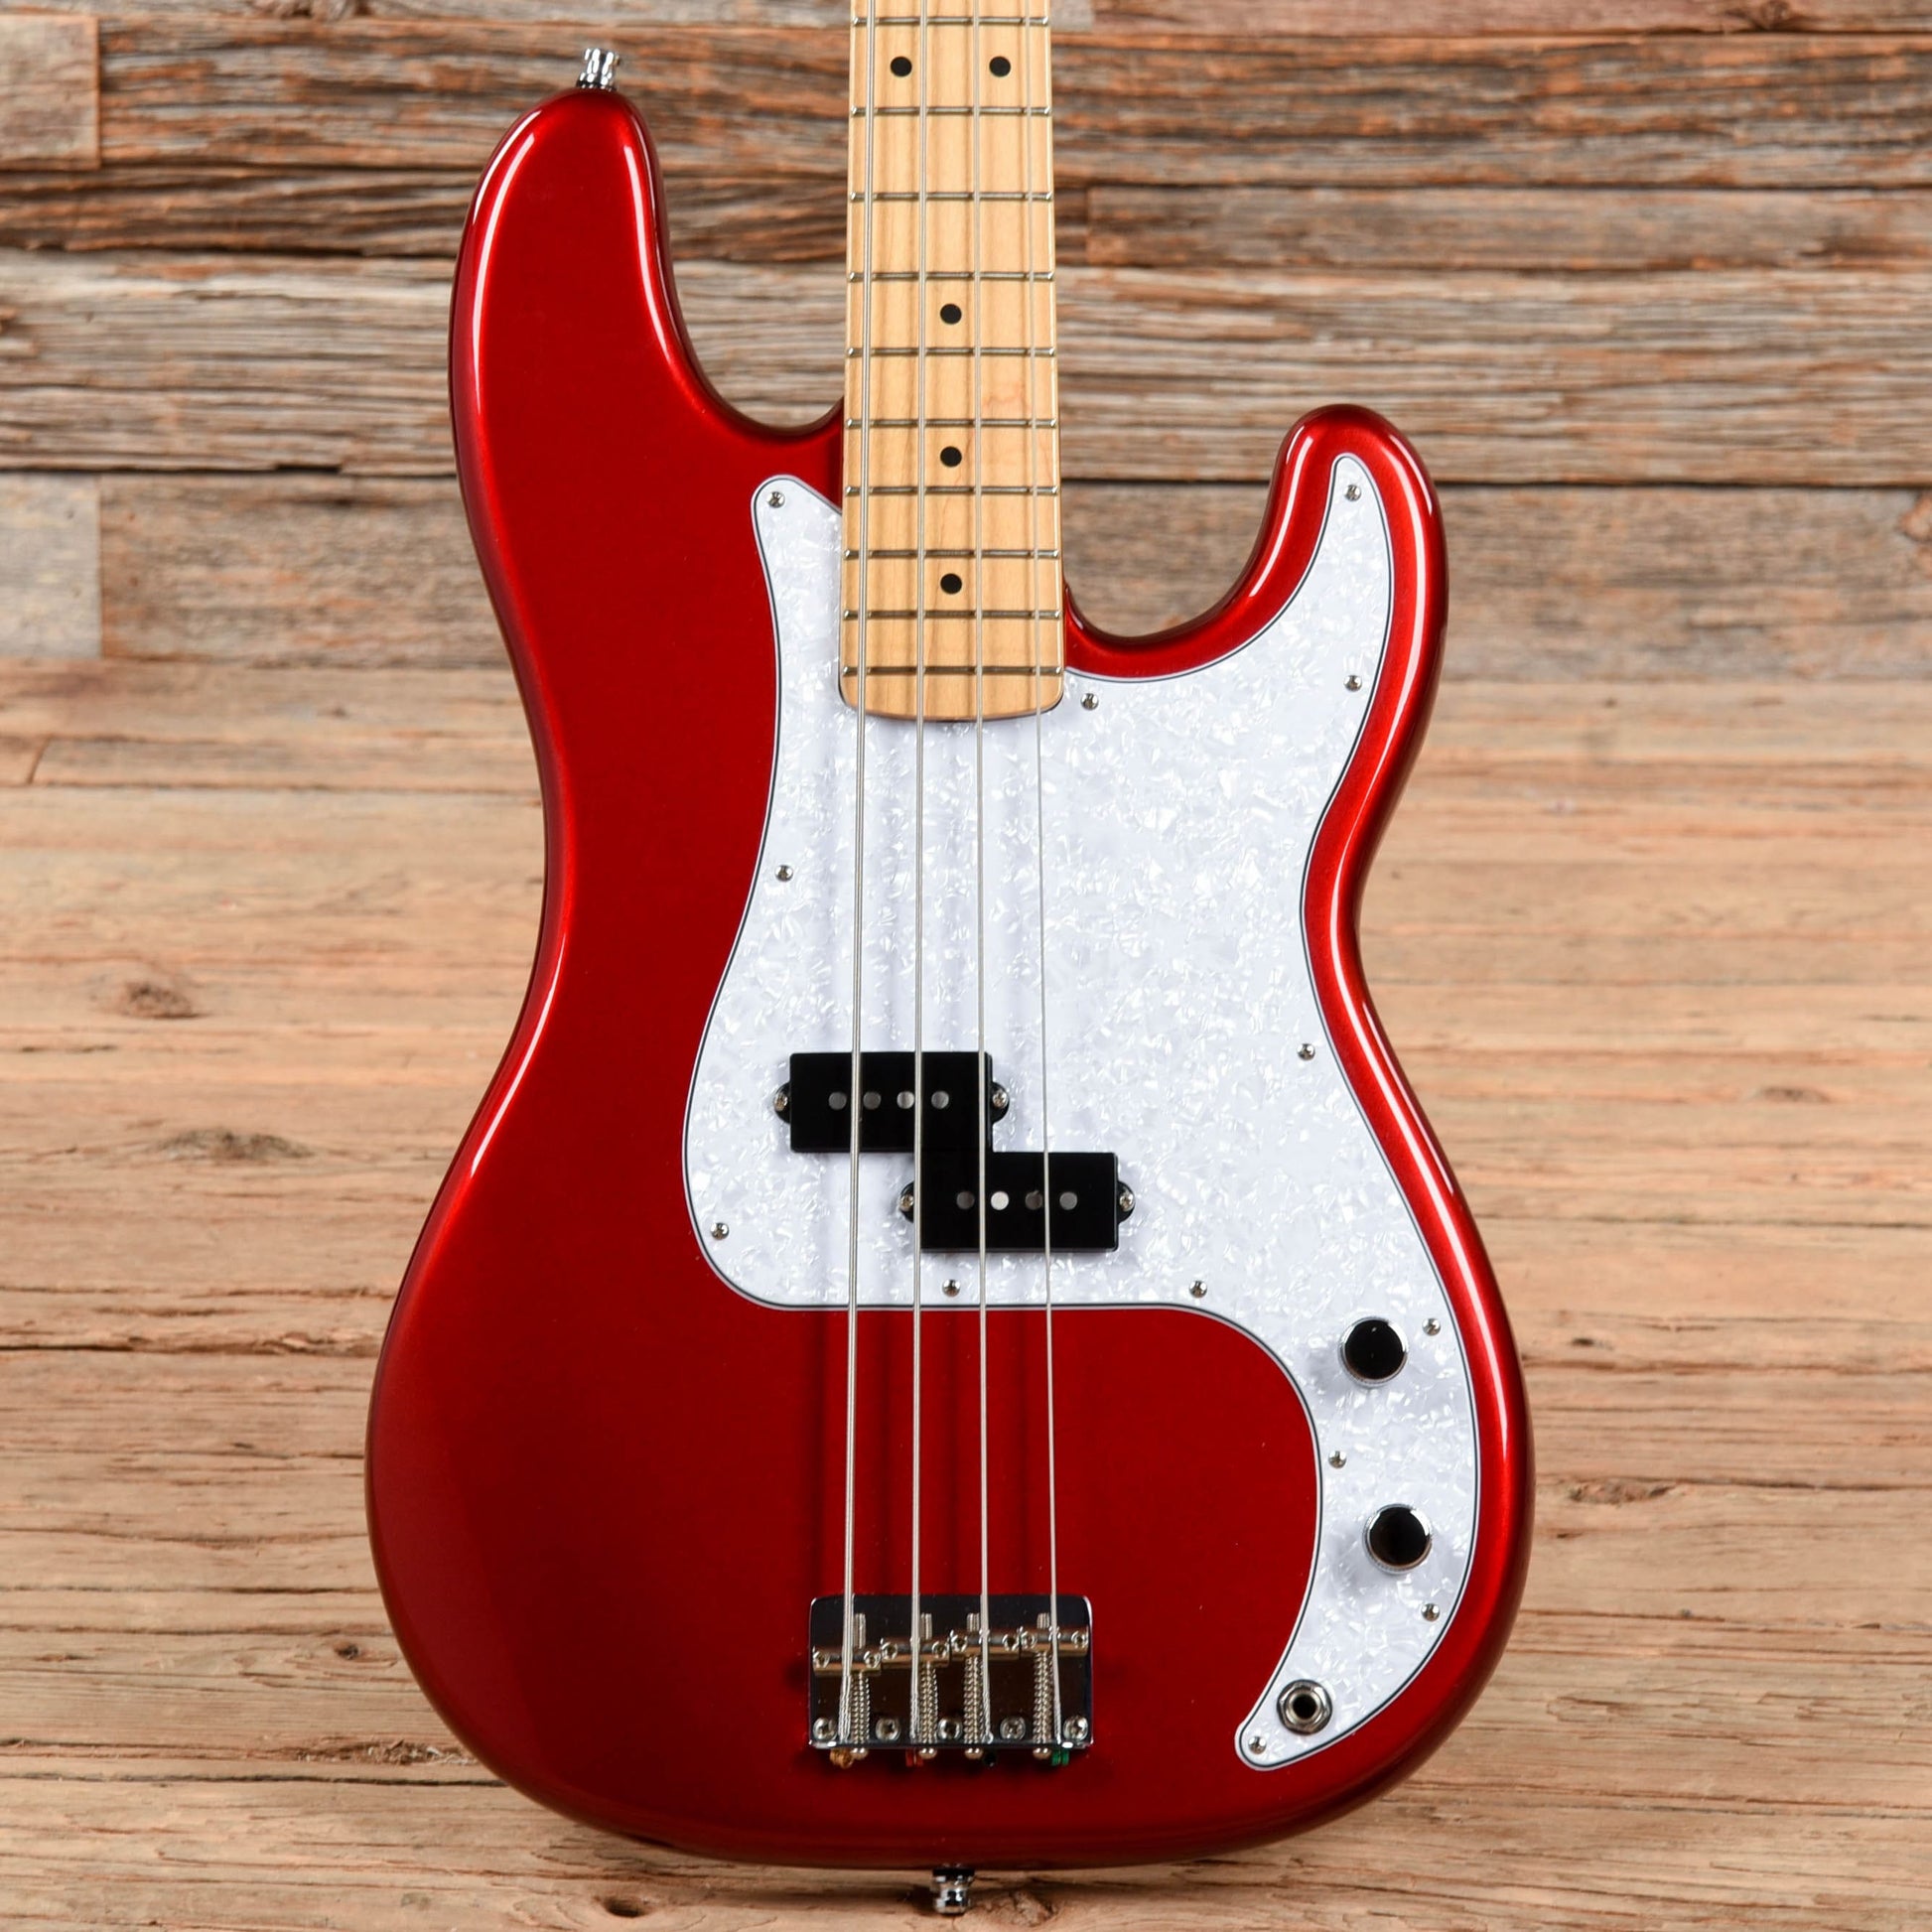 Fender American Special Precision Bass Candy Apple Red 2013 Bass Guitars / 4-String